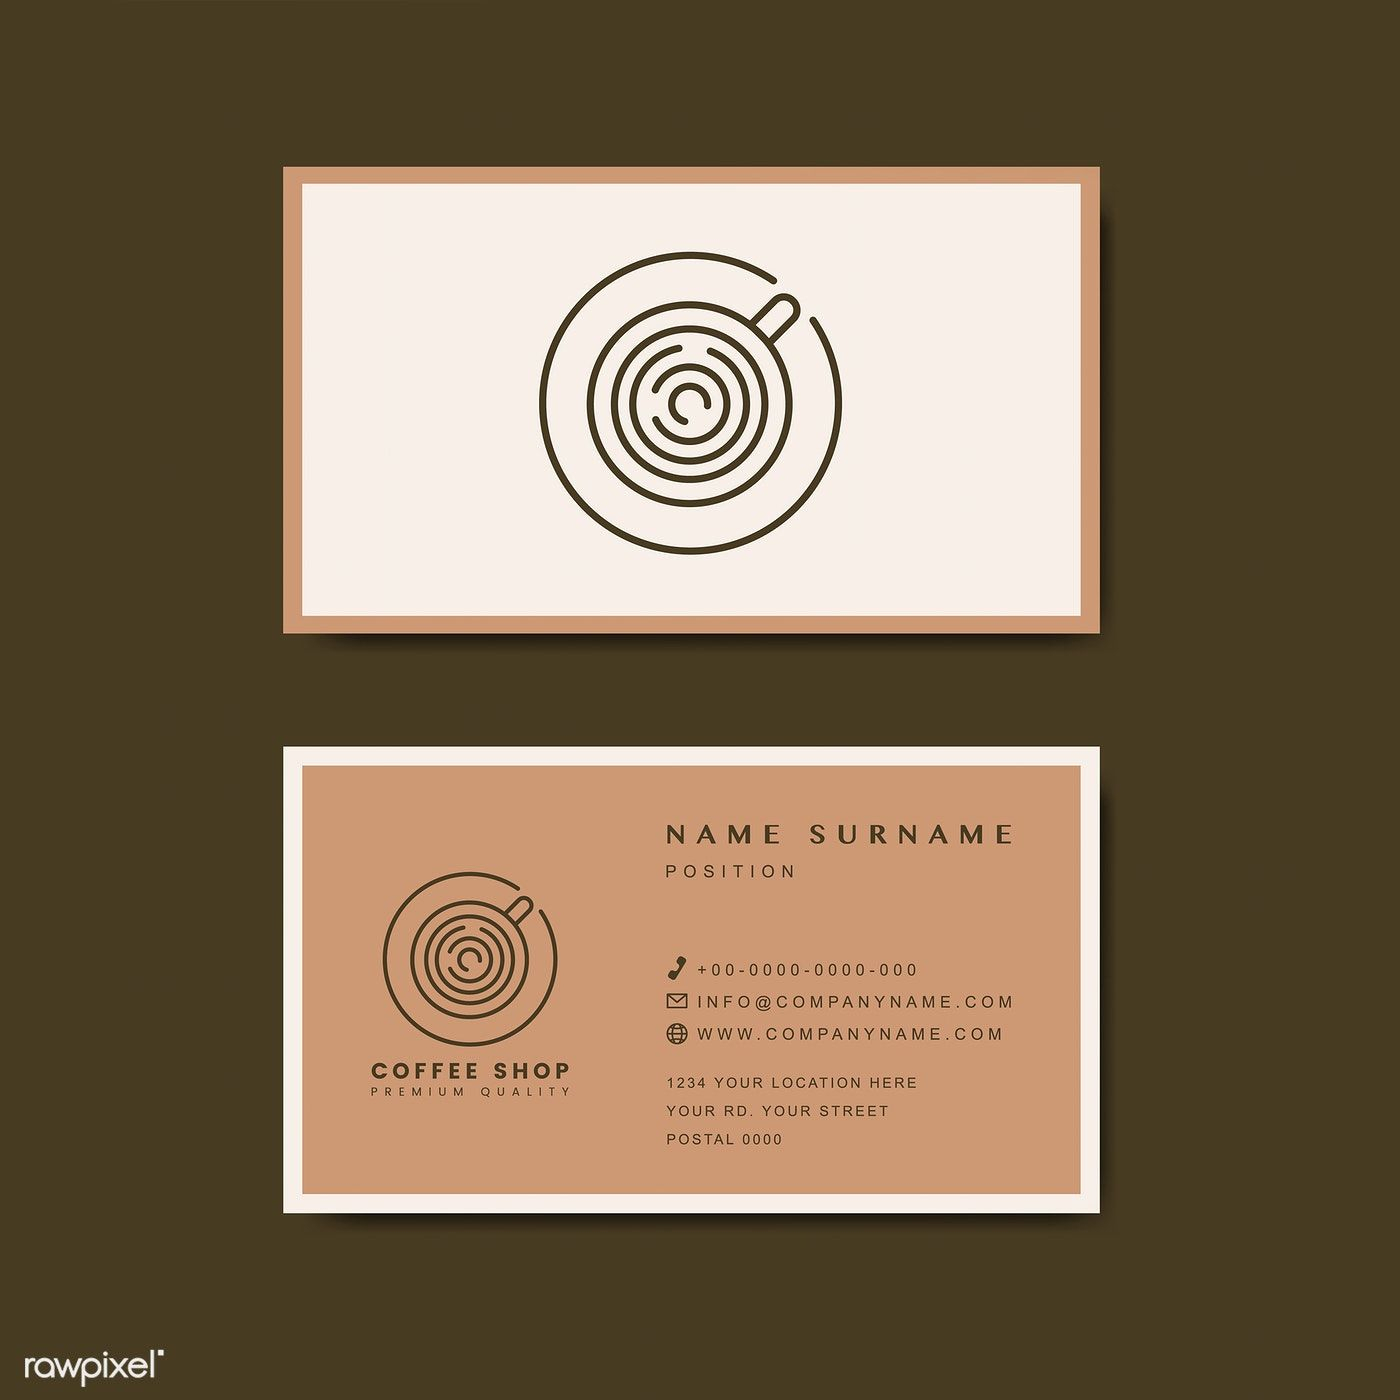 Coffee Shop Business Card Template Vector | Free Image For Dope Card Template